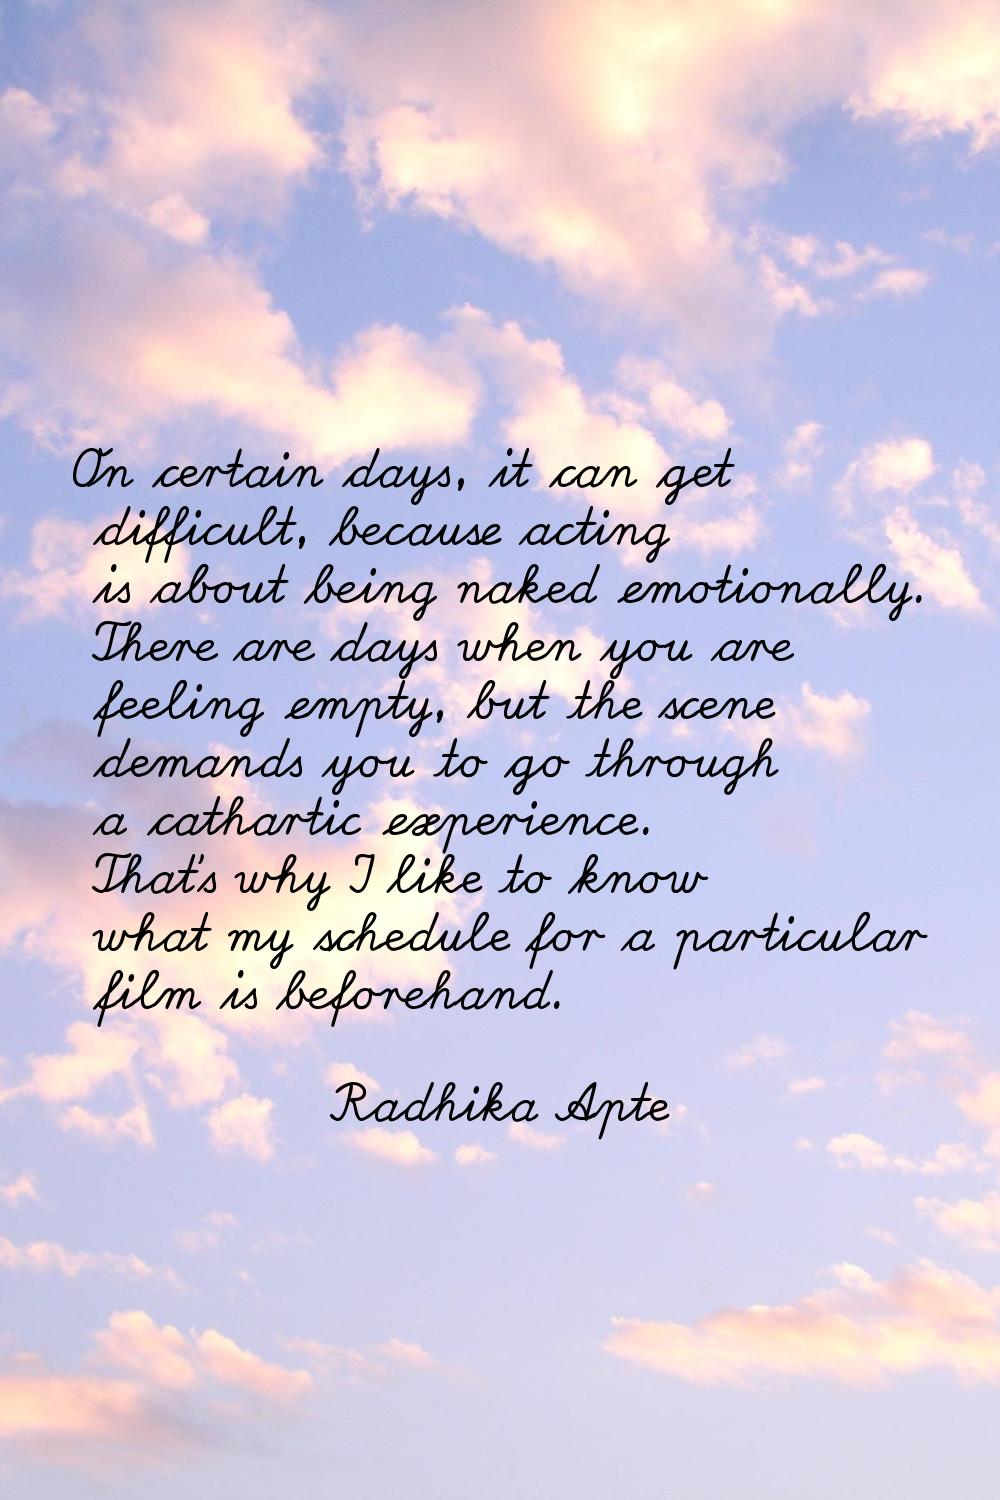 On certain days, it can get difficult, because acting is about being naked emotionally. There are d